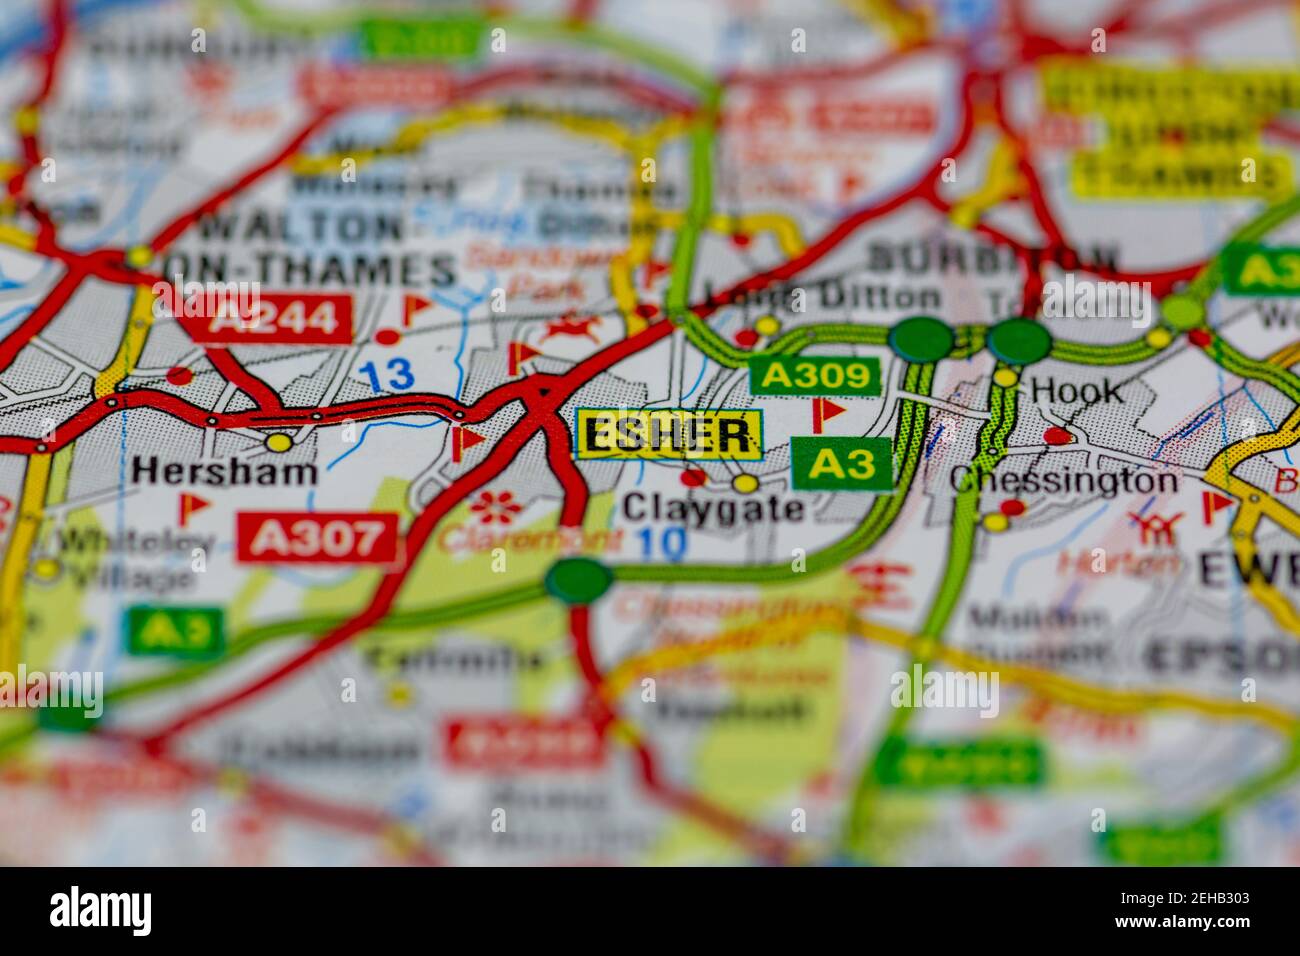 Esher and surrounding areas shown on a road map or Geography map Stock Photo